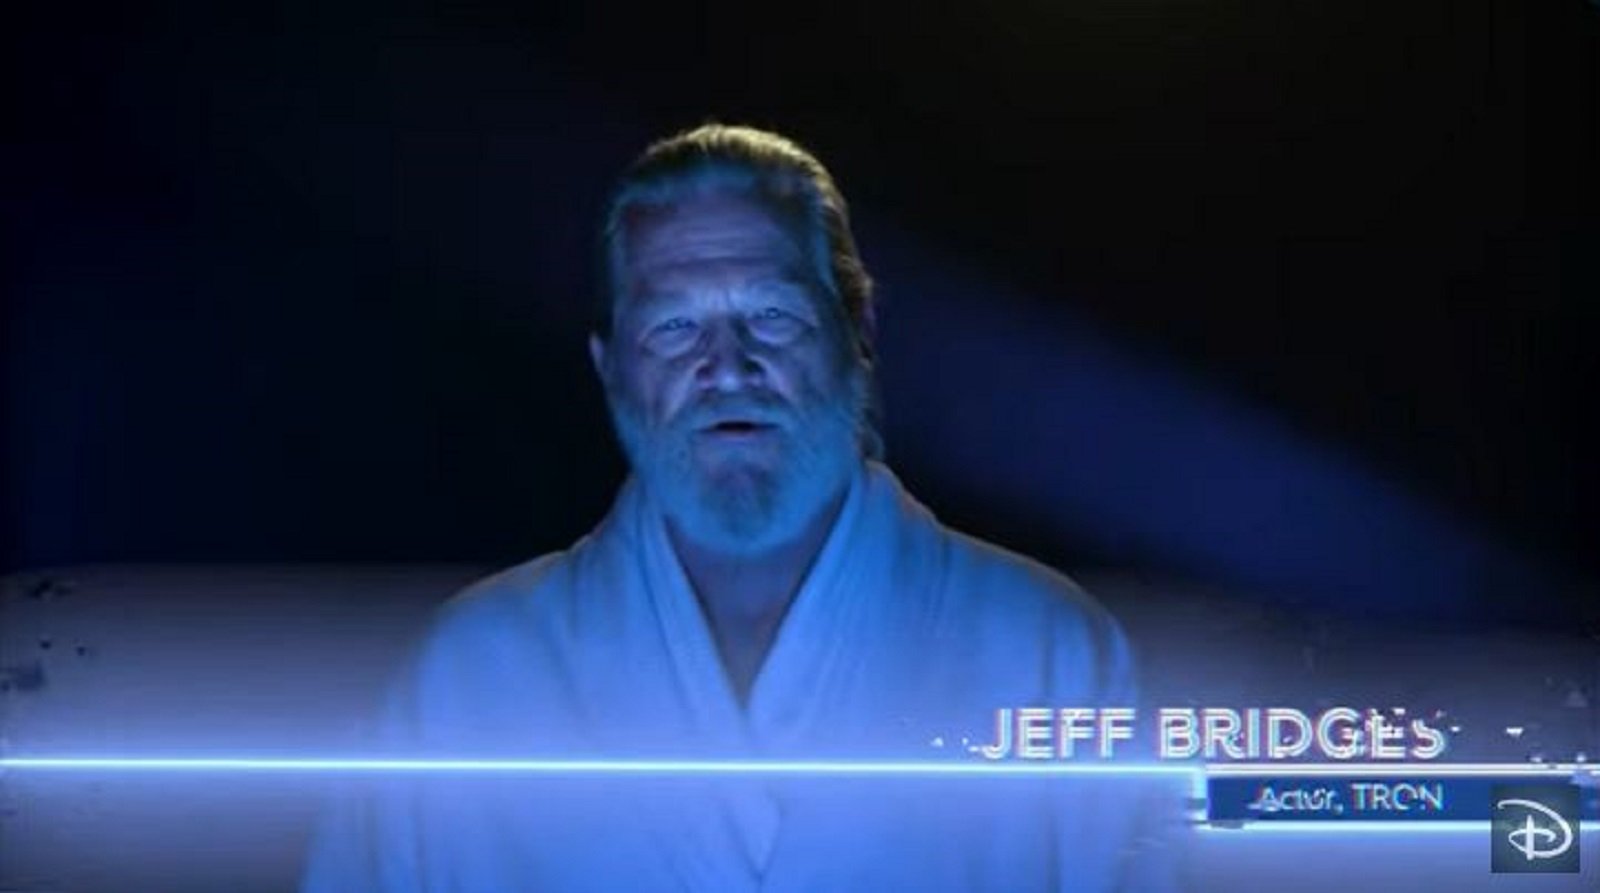 Tron, Jeff Bridges is back in character for a special Disney video message: "Who's ready to run?"